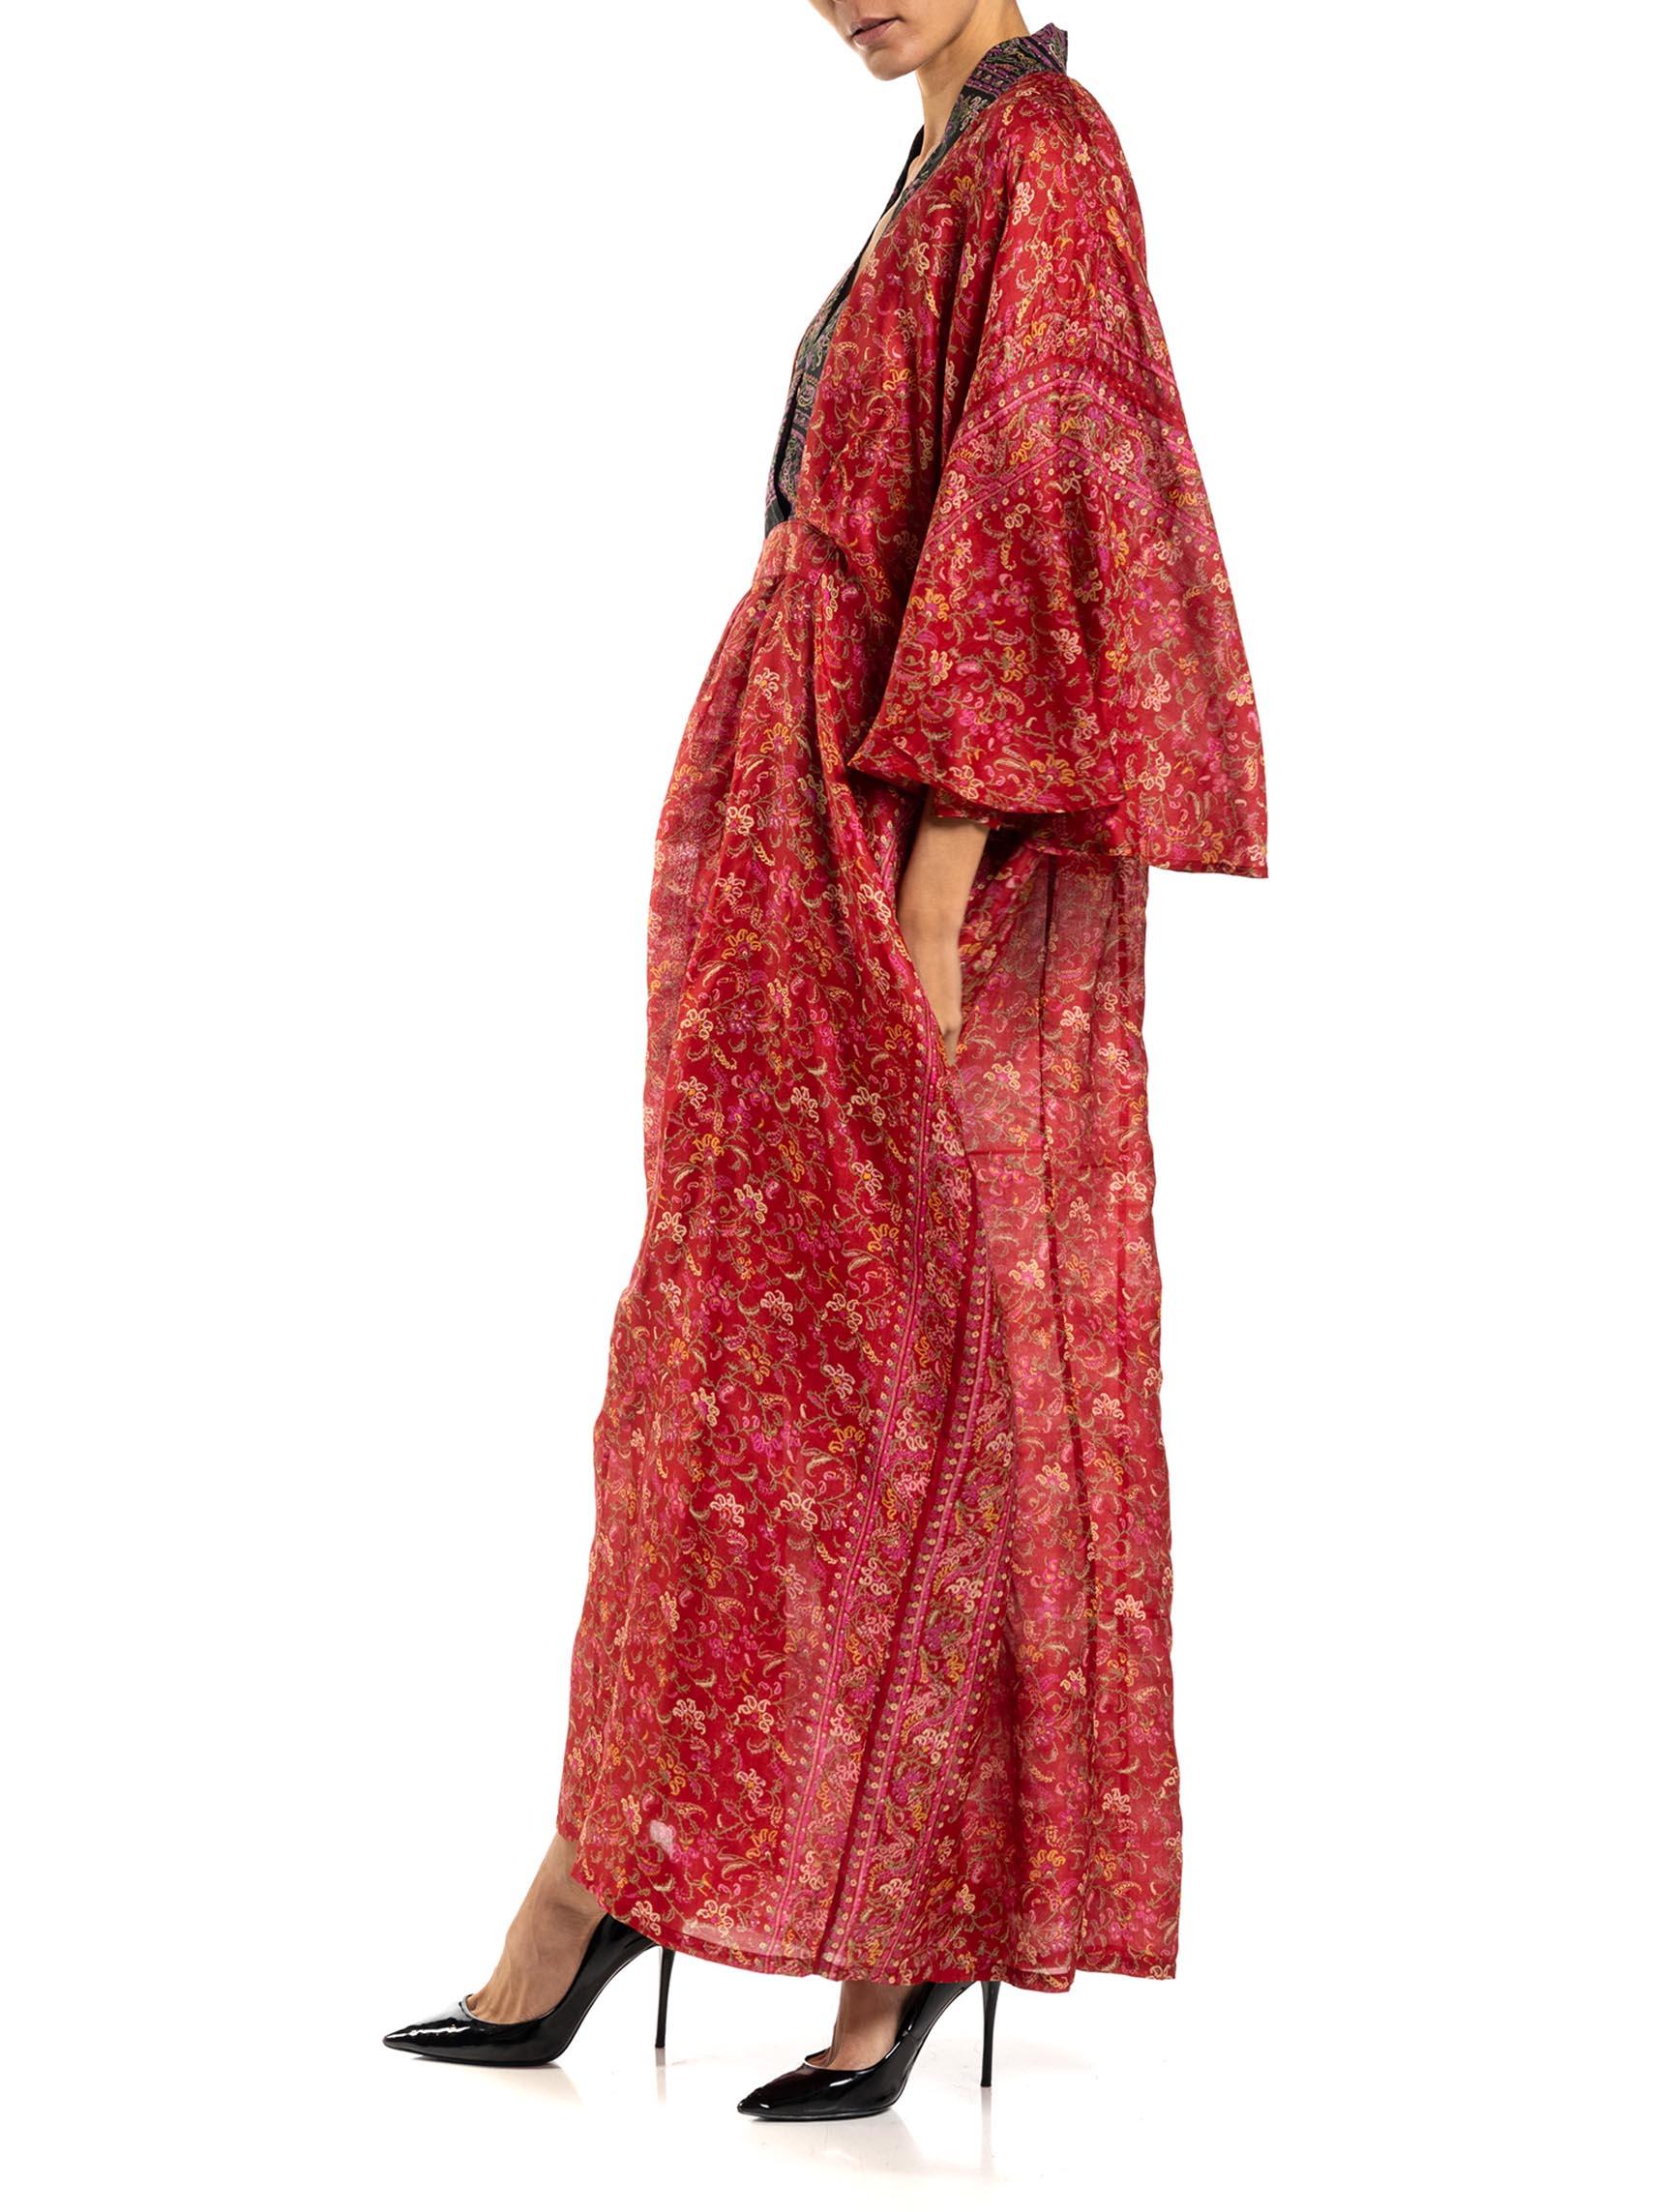 MORPHEW COLLECTION Red & Black Paisley Silk Floral Kaftan Made From Vintage Sari For Sale 3